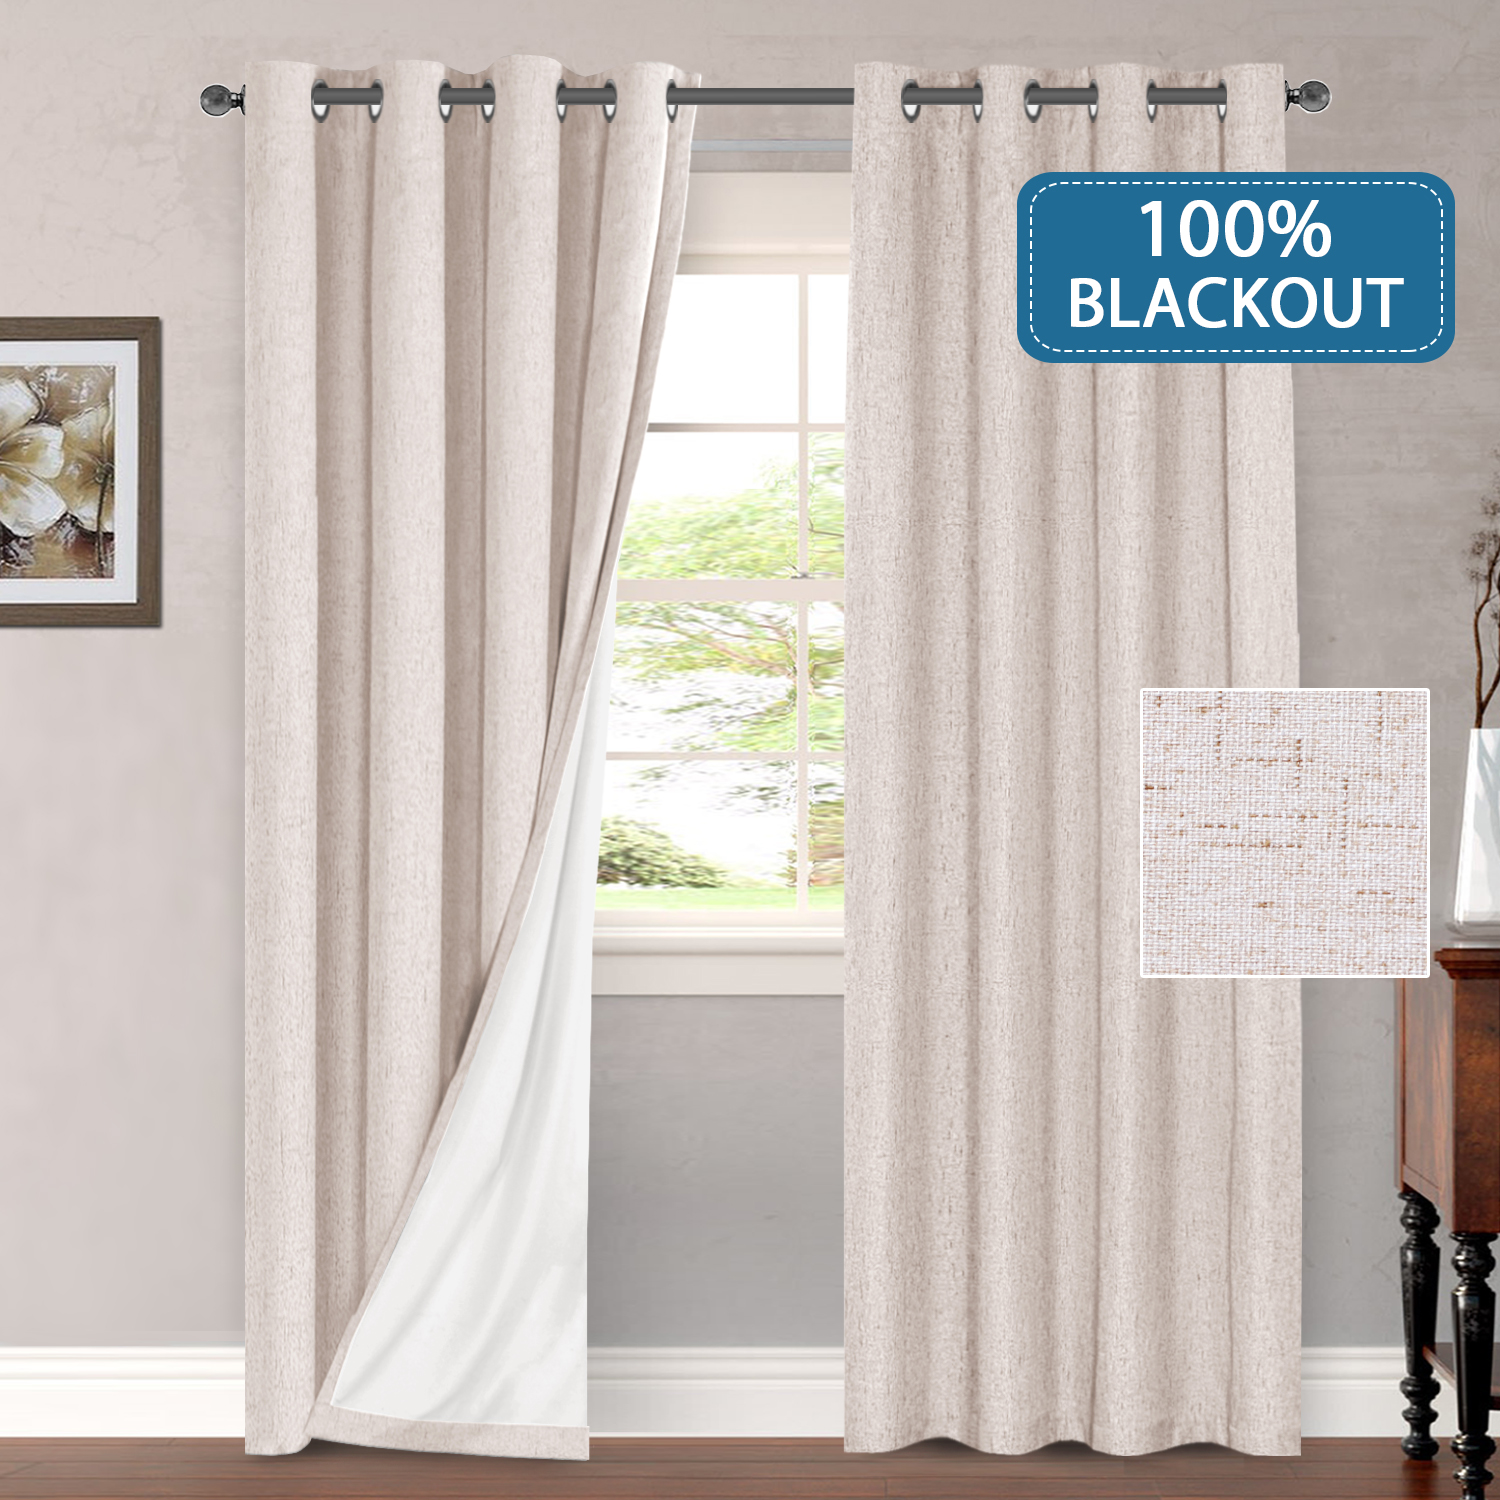 Outdoor Curtains 100% Blackout Draperies For Patio Waterproof Linen Look Blackout Curtains For Bedroom Extra Long 108 Inches Grommets Window Curtain Panels Natural Color, 2 Panels - image 1 of 8